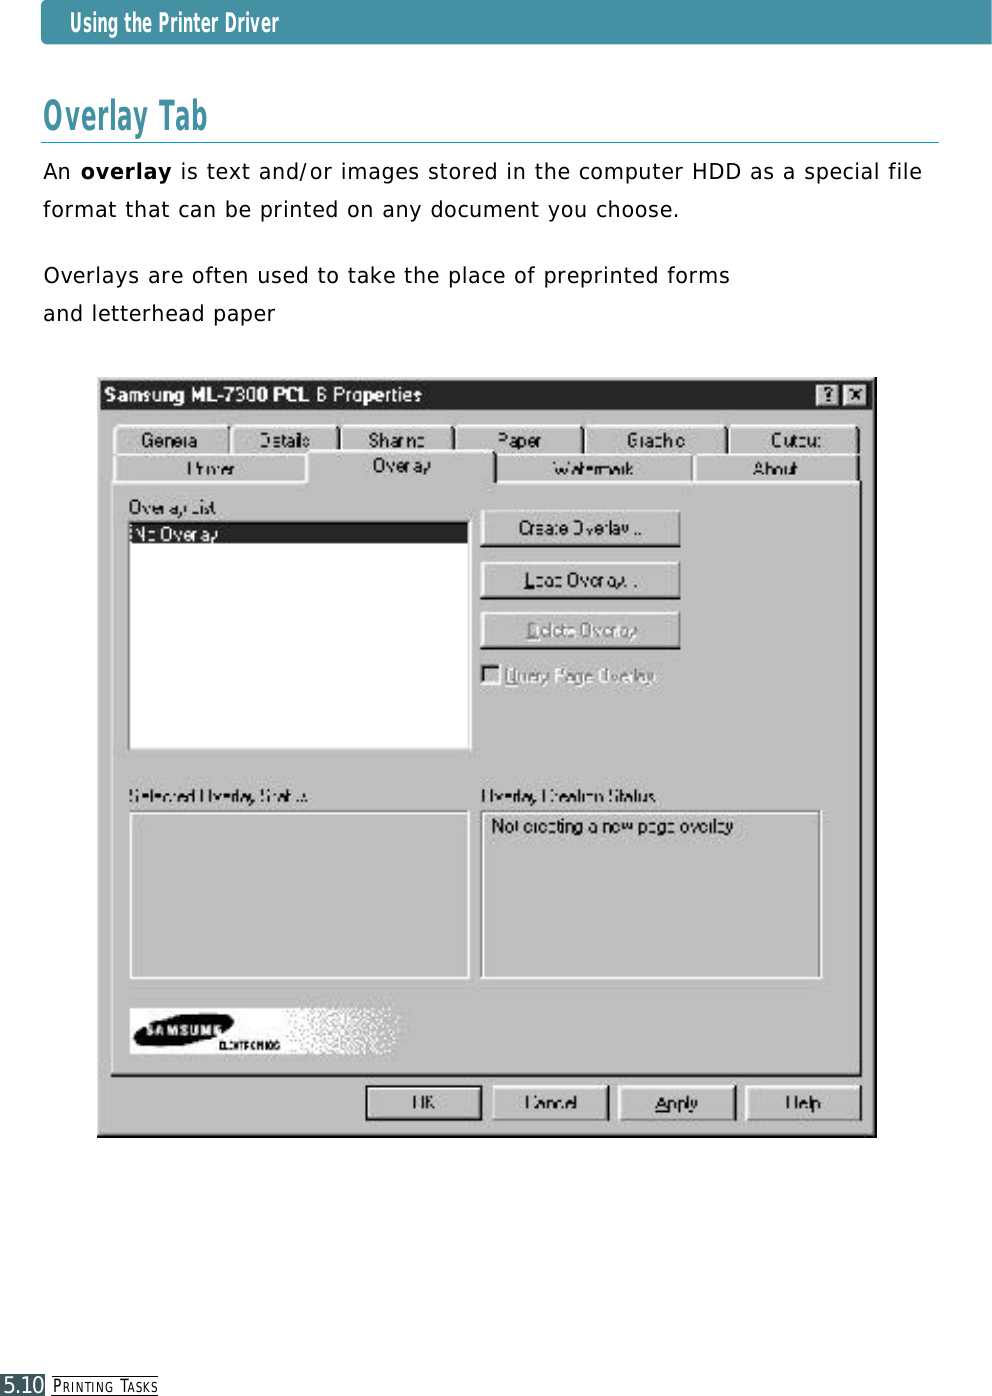 PR I N T I N G TA S K S5.10Overlay TabUsing the Printer DriverAn o v e r l a y is text and/or images stored in the computer HDD as a special fileformat that can be printed on any document you choose. O ve r l a ys are often used to take the place of preprinted forms and letterhead paper